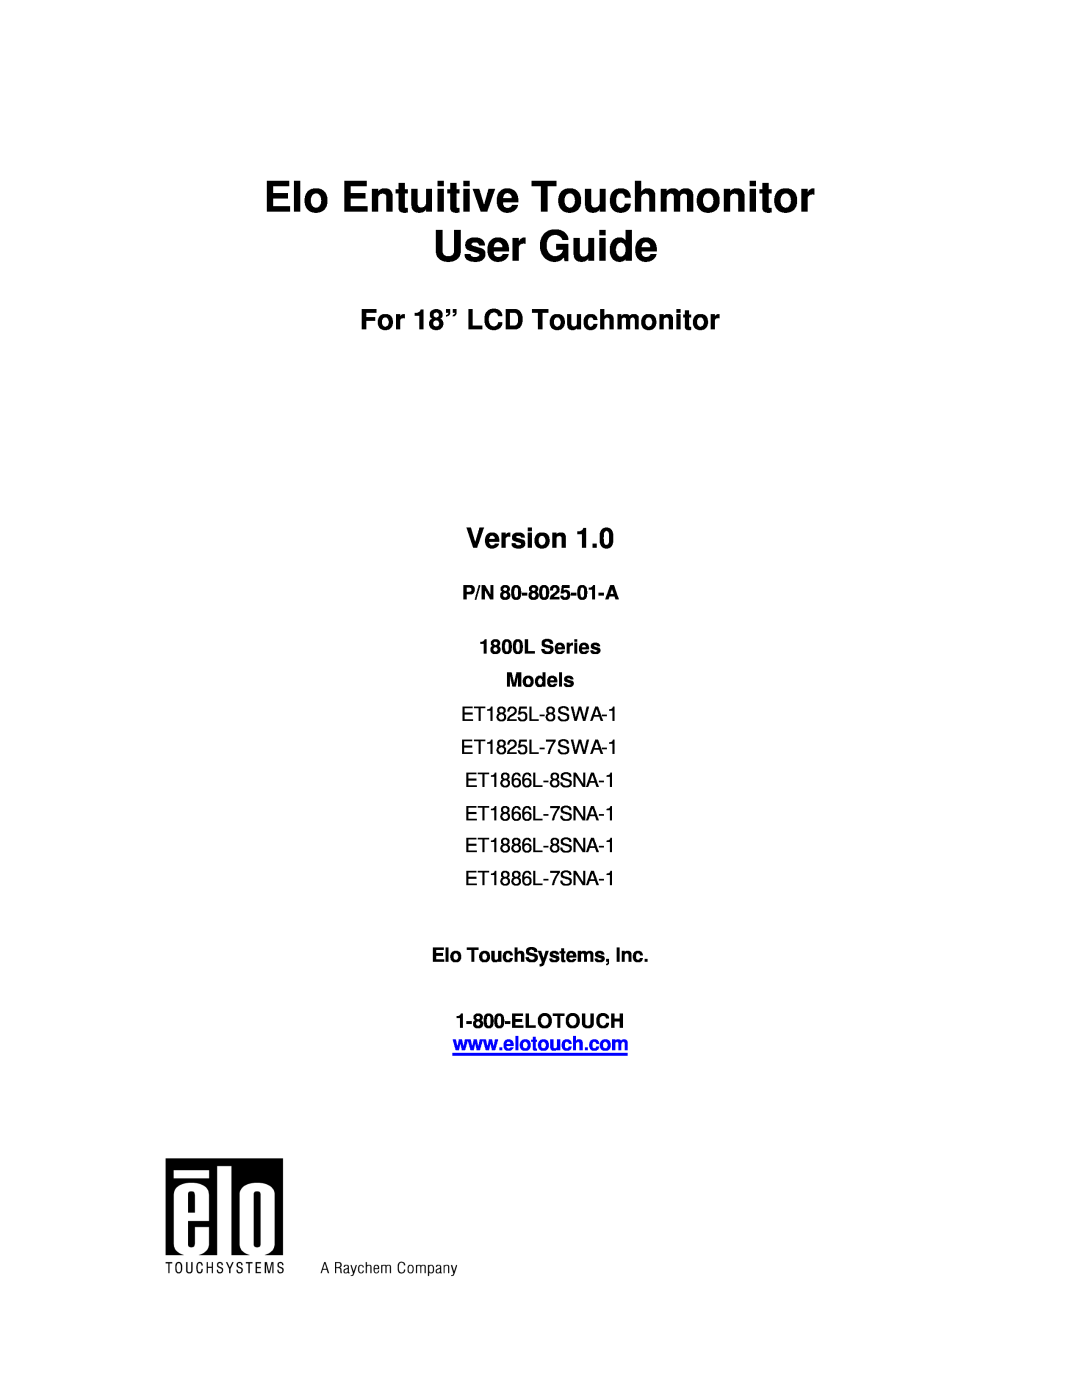 Elo TouchSystems ET1825L-8SWA-1 manual Elo Entuitive Touchmonitor User Guide, For 18” LCD Touchmonitor Version 